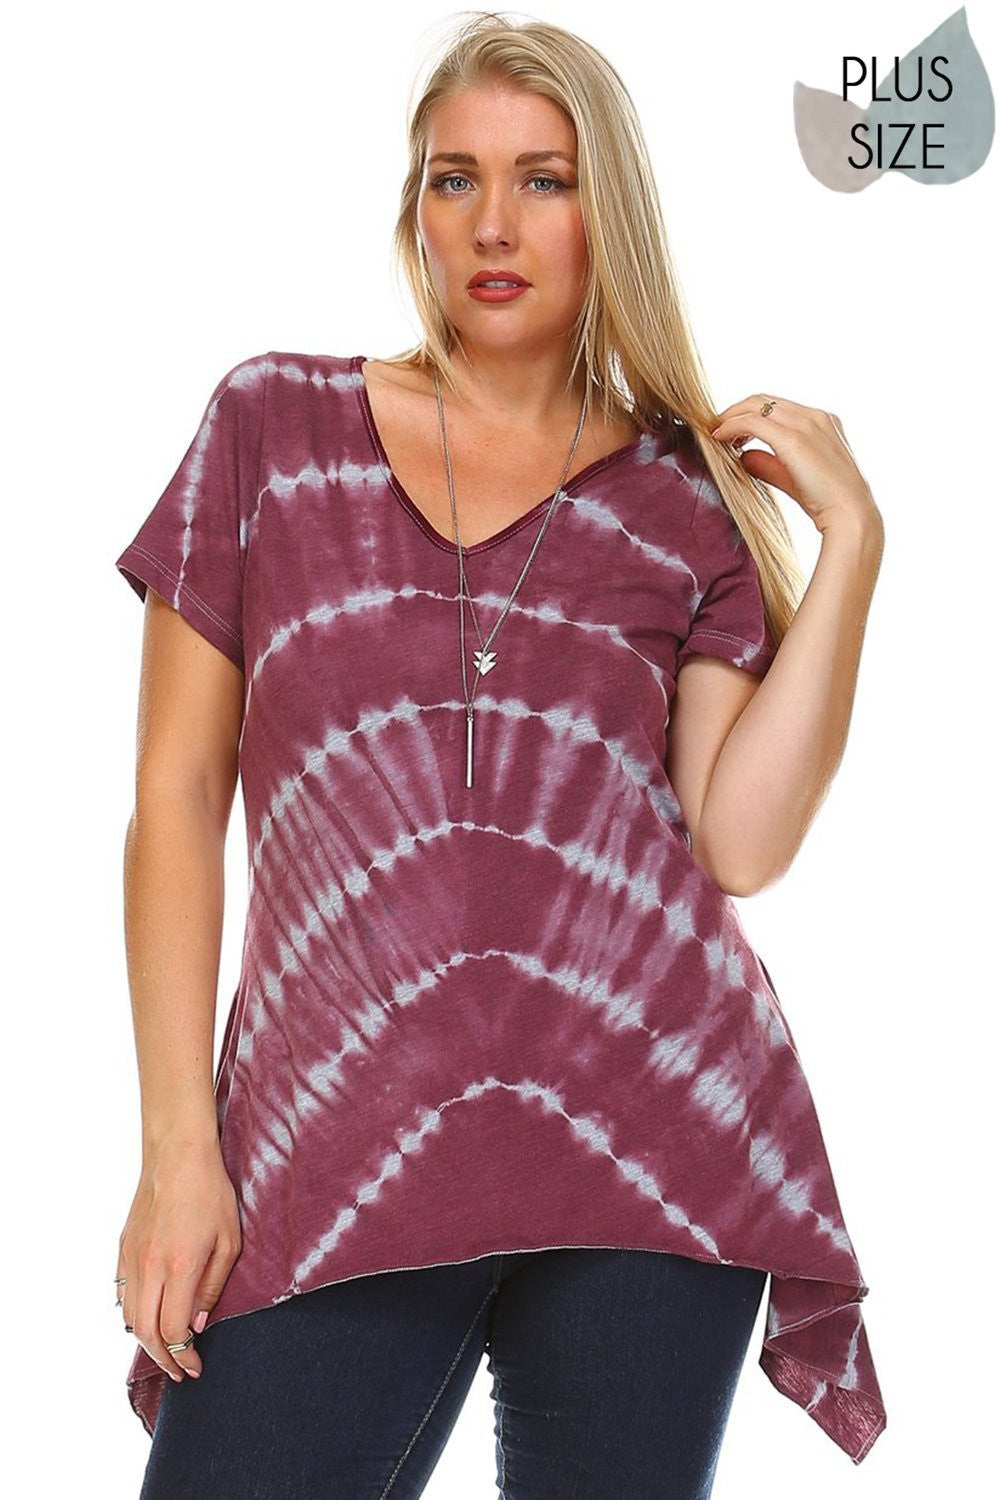 Beautiful woman wearing a Burgundy  V-neck tie dye tunic shark bite top Perfect for Spring & Summer, Evening wear, Festival, Beach Day, Vacation, Dance, Poolside Parties